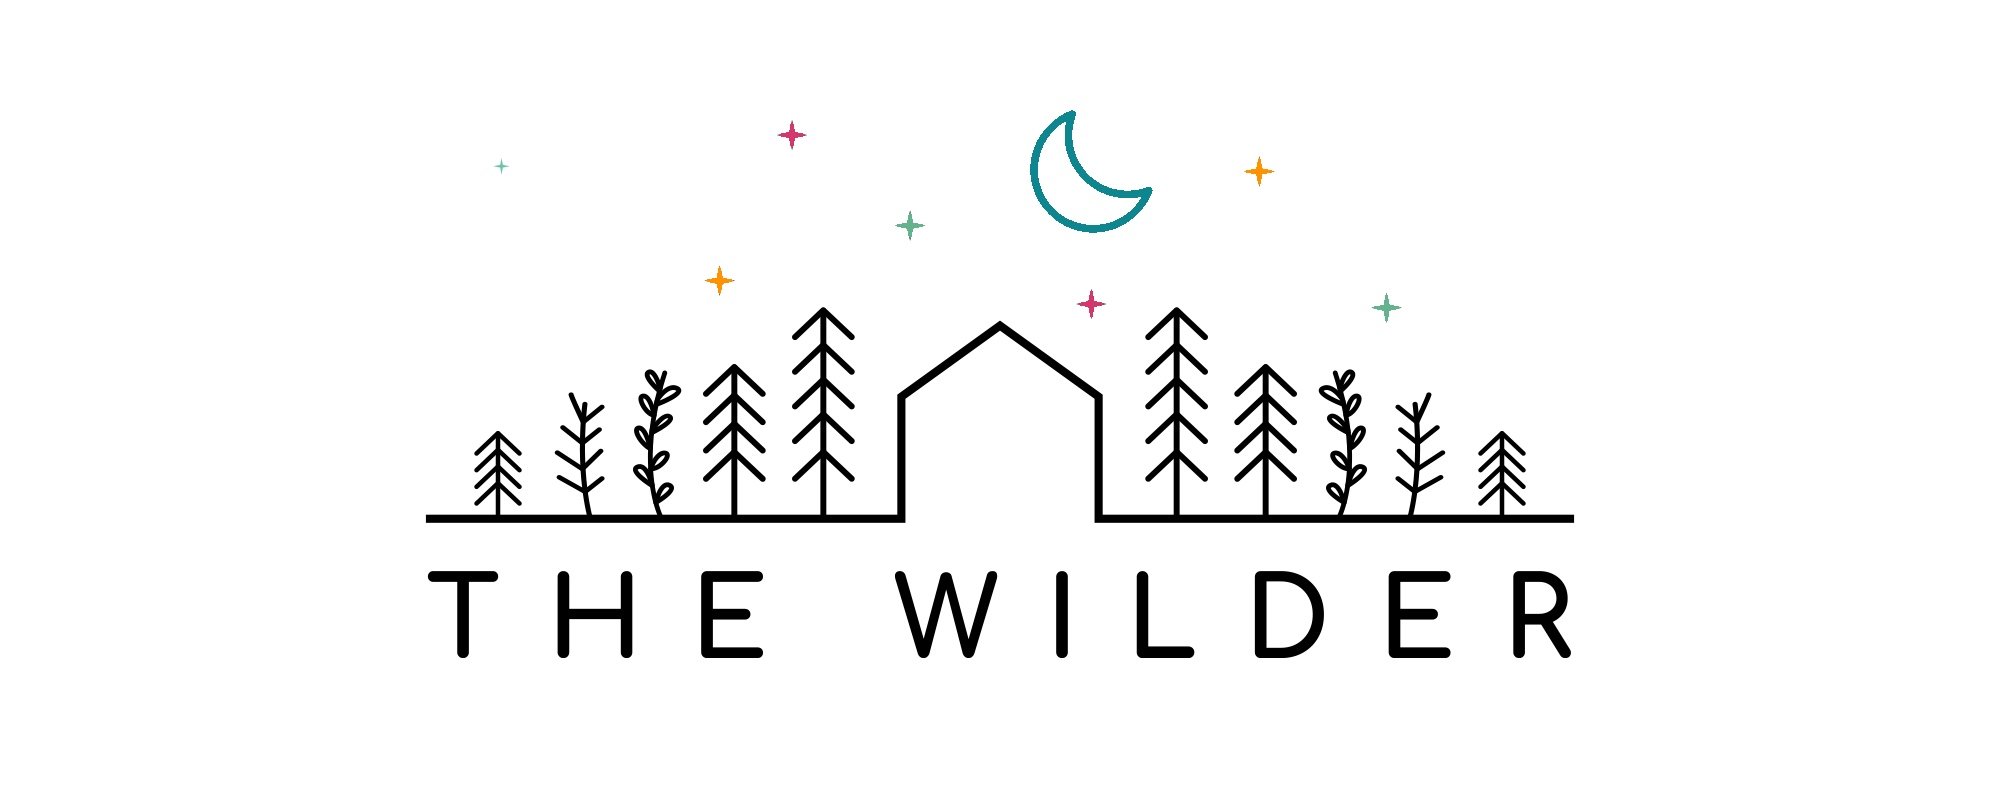 March/April 2022 - The Wilder ($425)